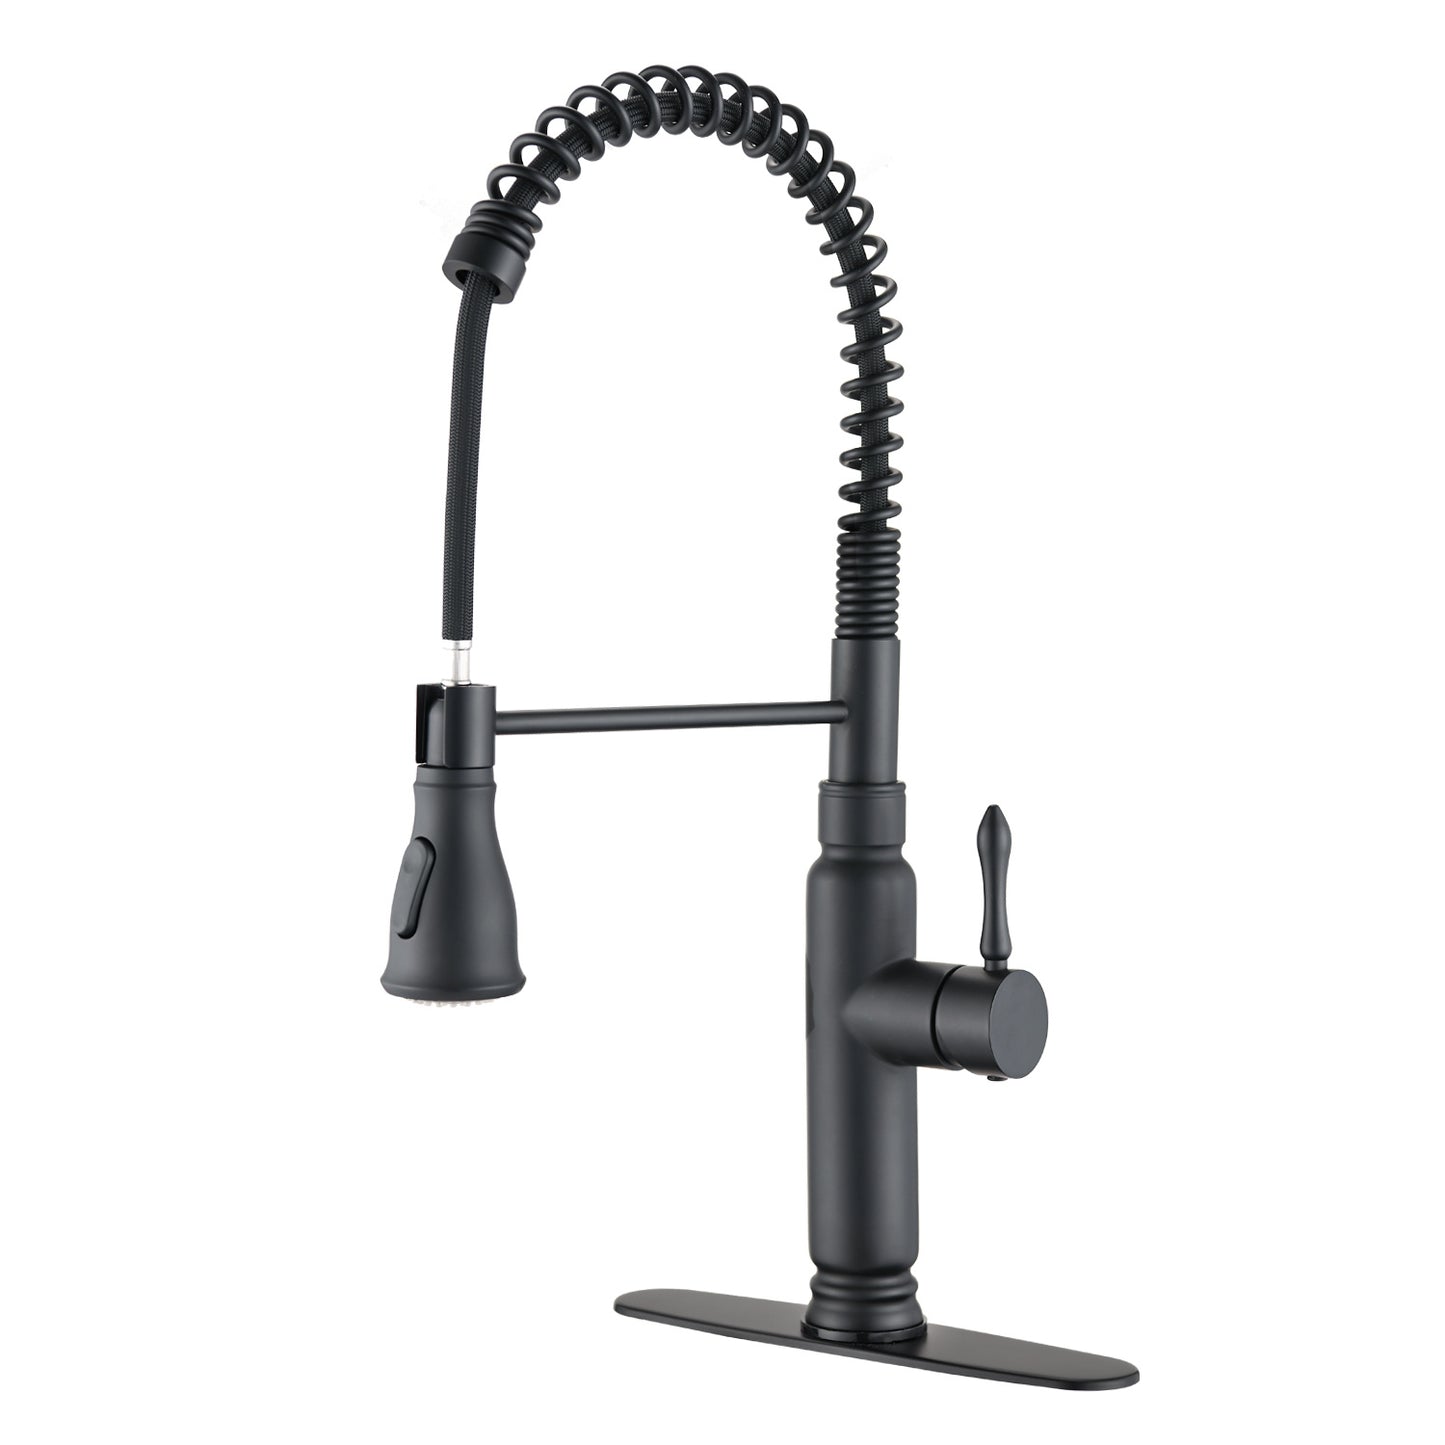 A|M Aquae Stainless steel kitchen faucet